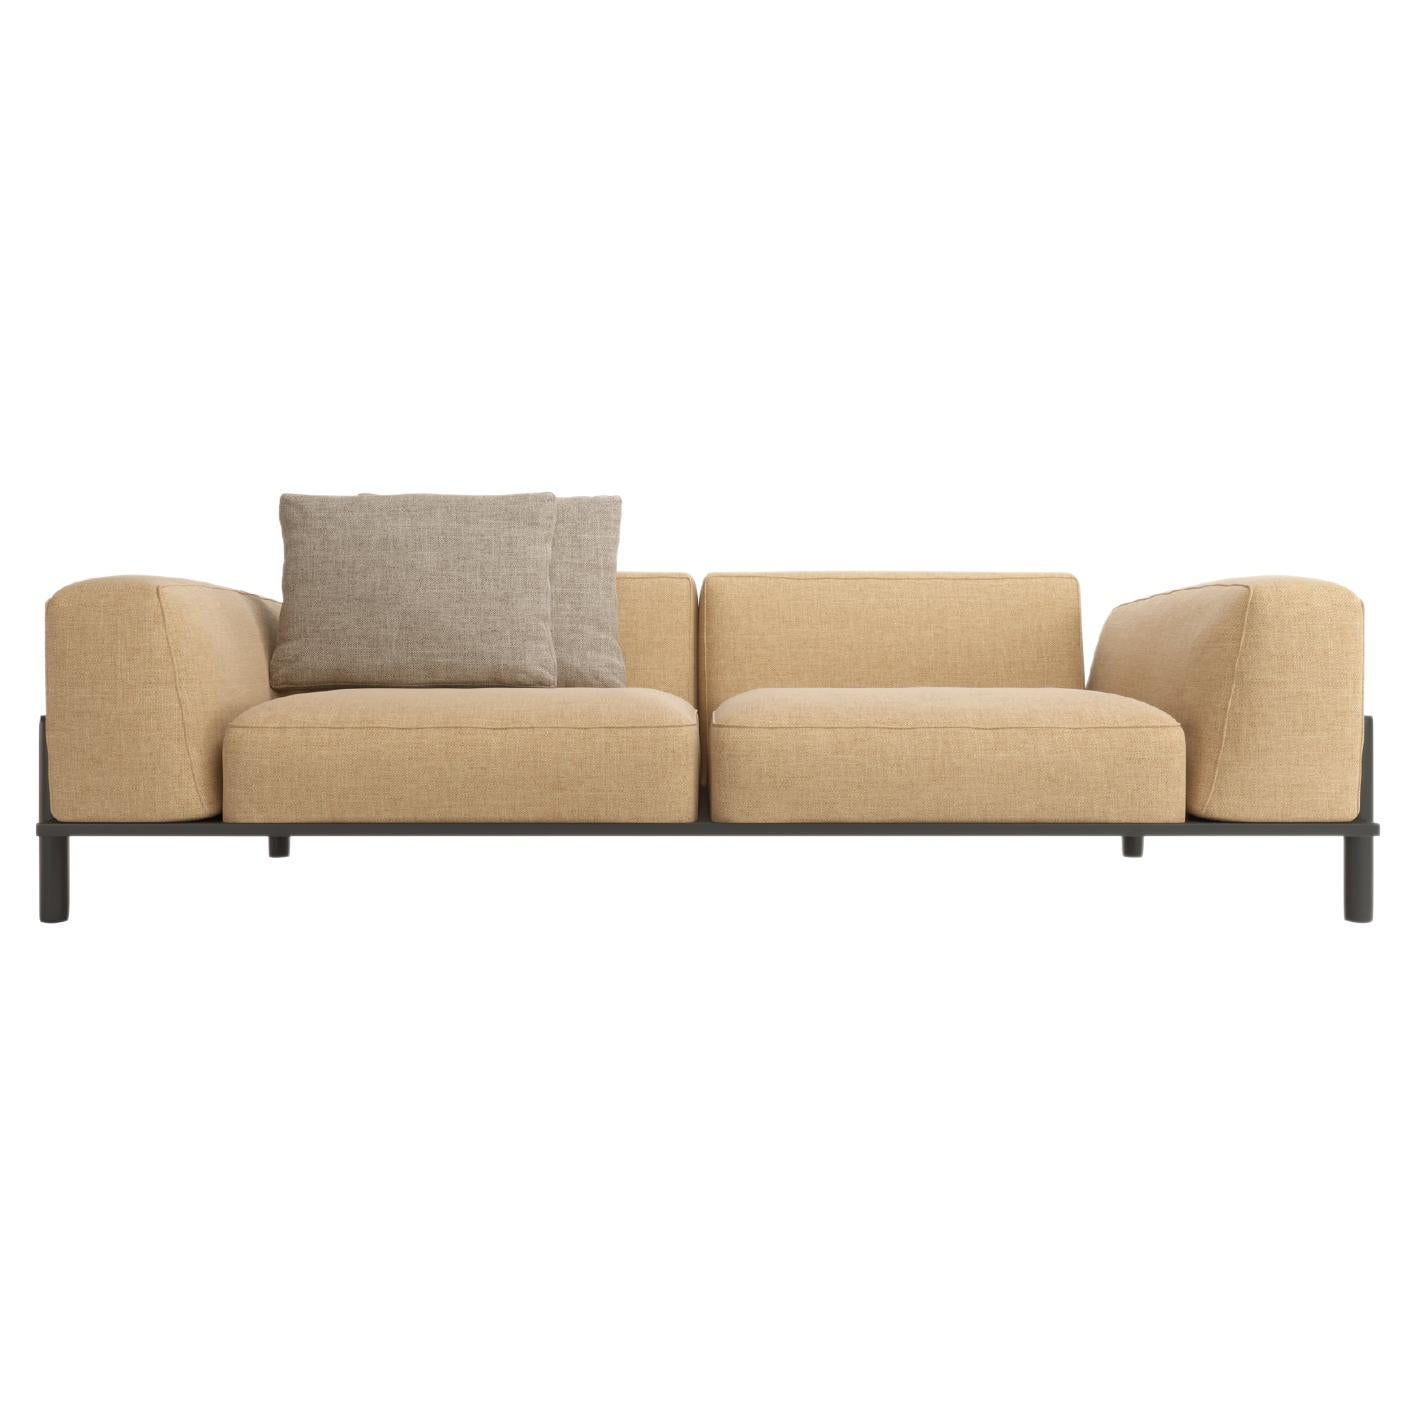 Club 2 seats sofa, upholstered with lacquered iron details For Sale